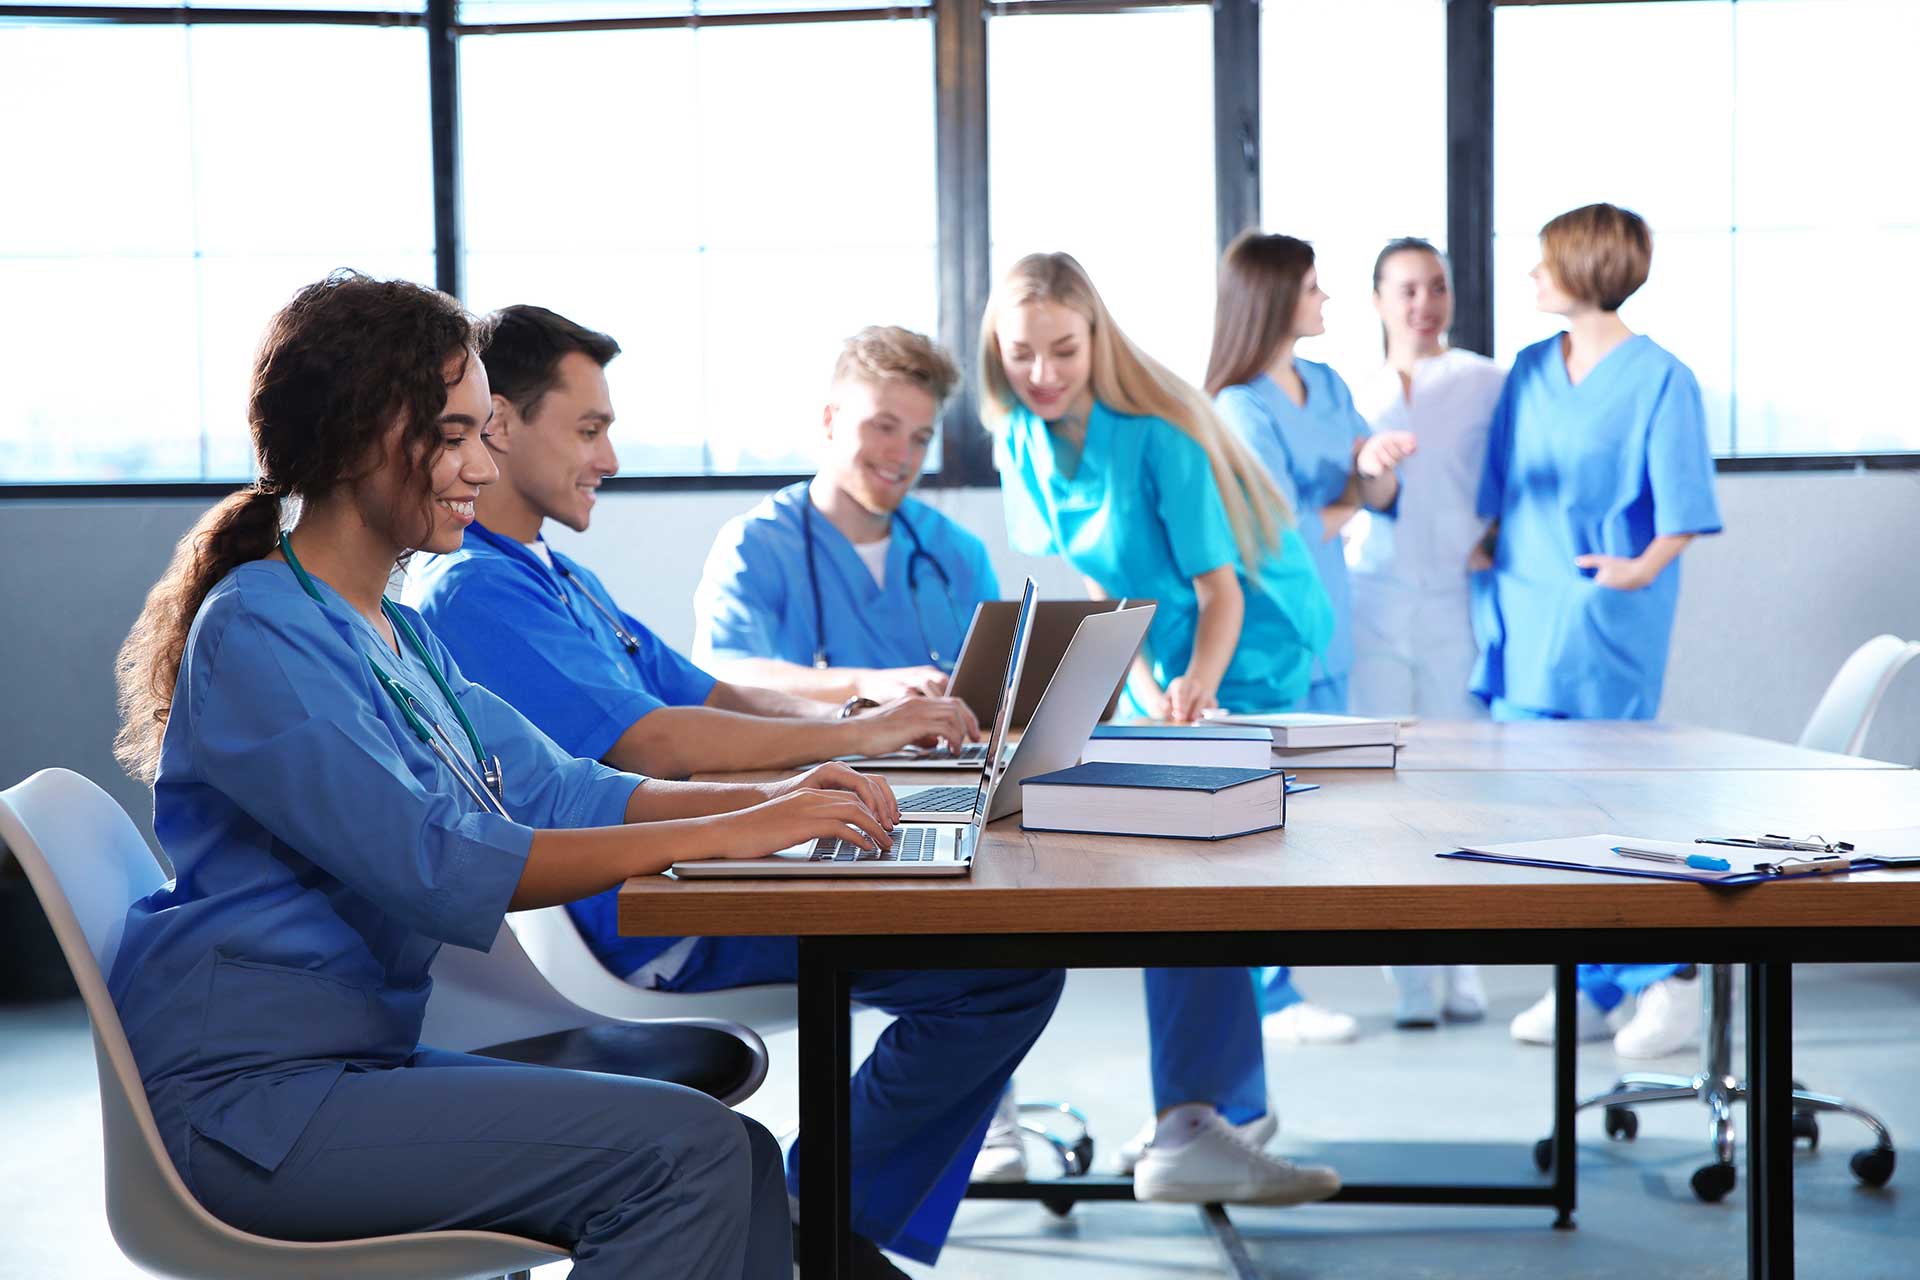 Group of nursing students conversing or working at laptops in a meeting room